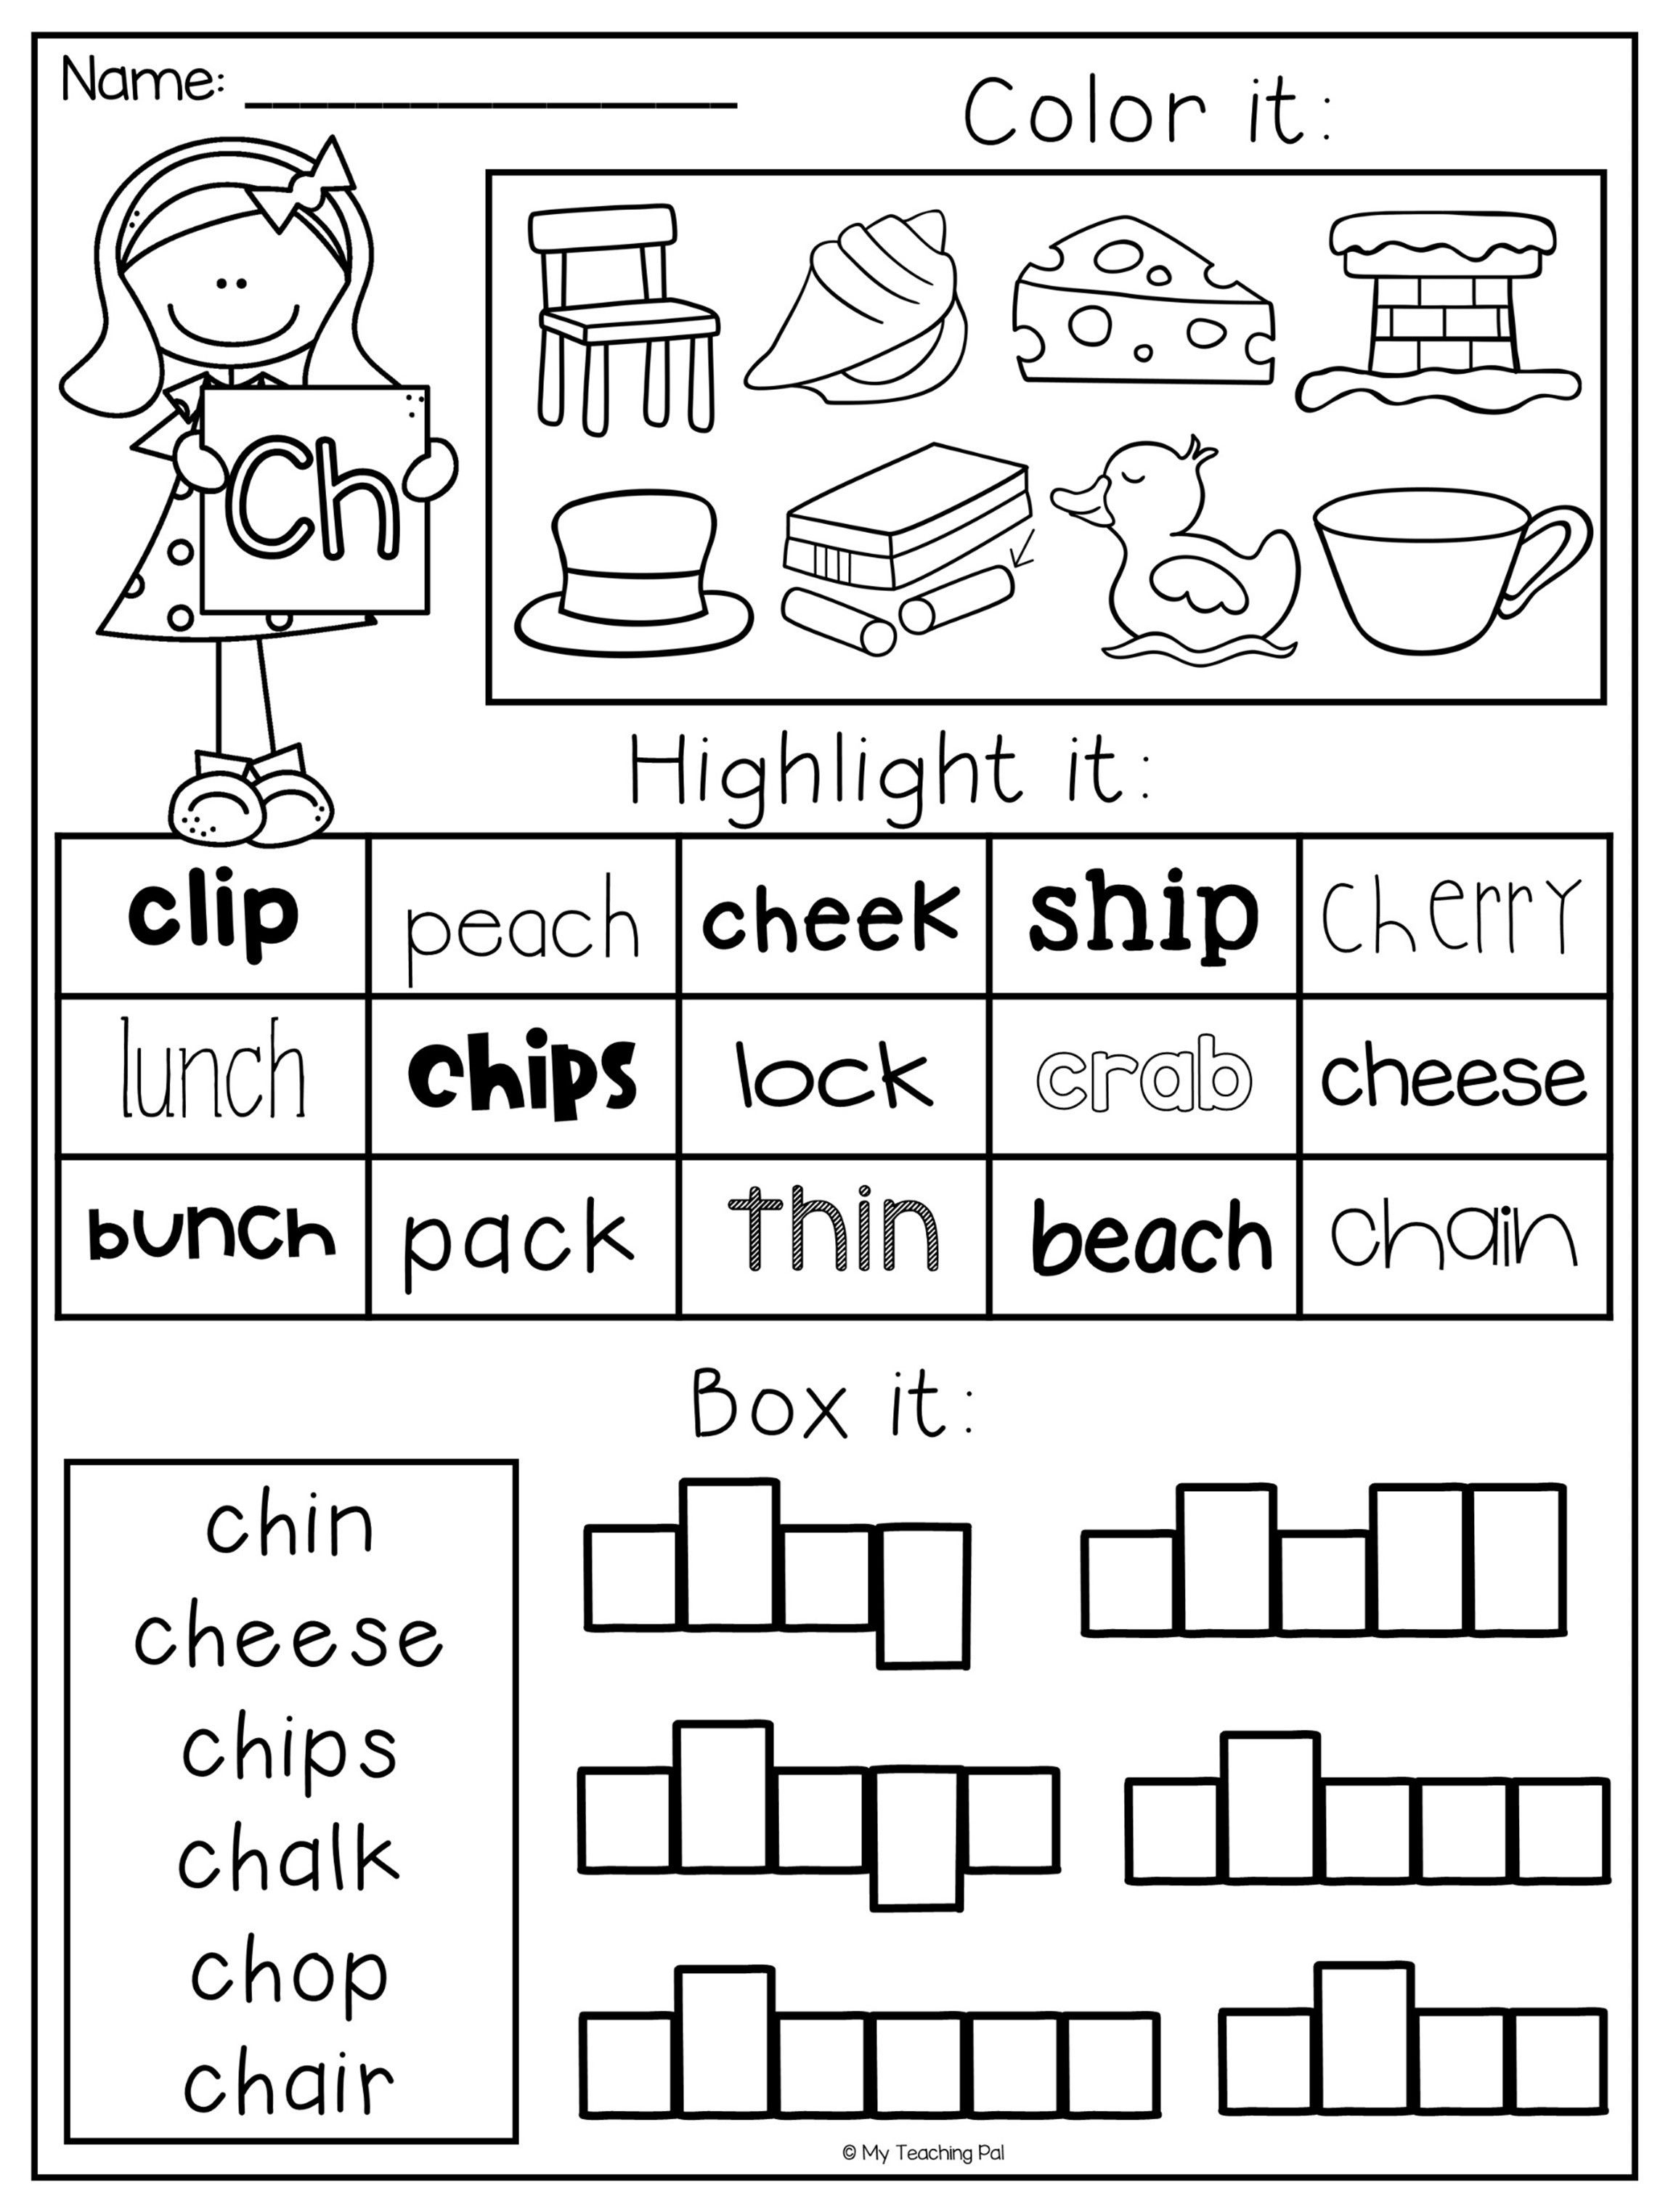 Digraph Worksheet Packet Ch Sh Th Wh Ph Educational Printable 